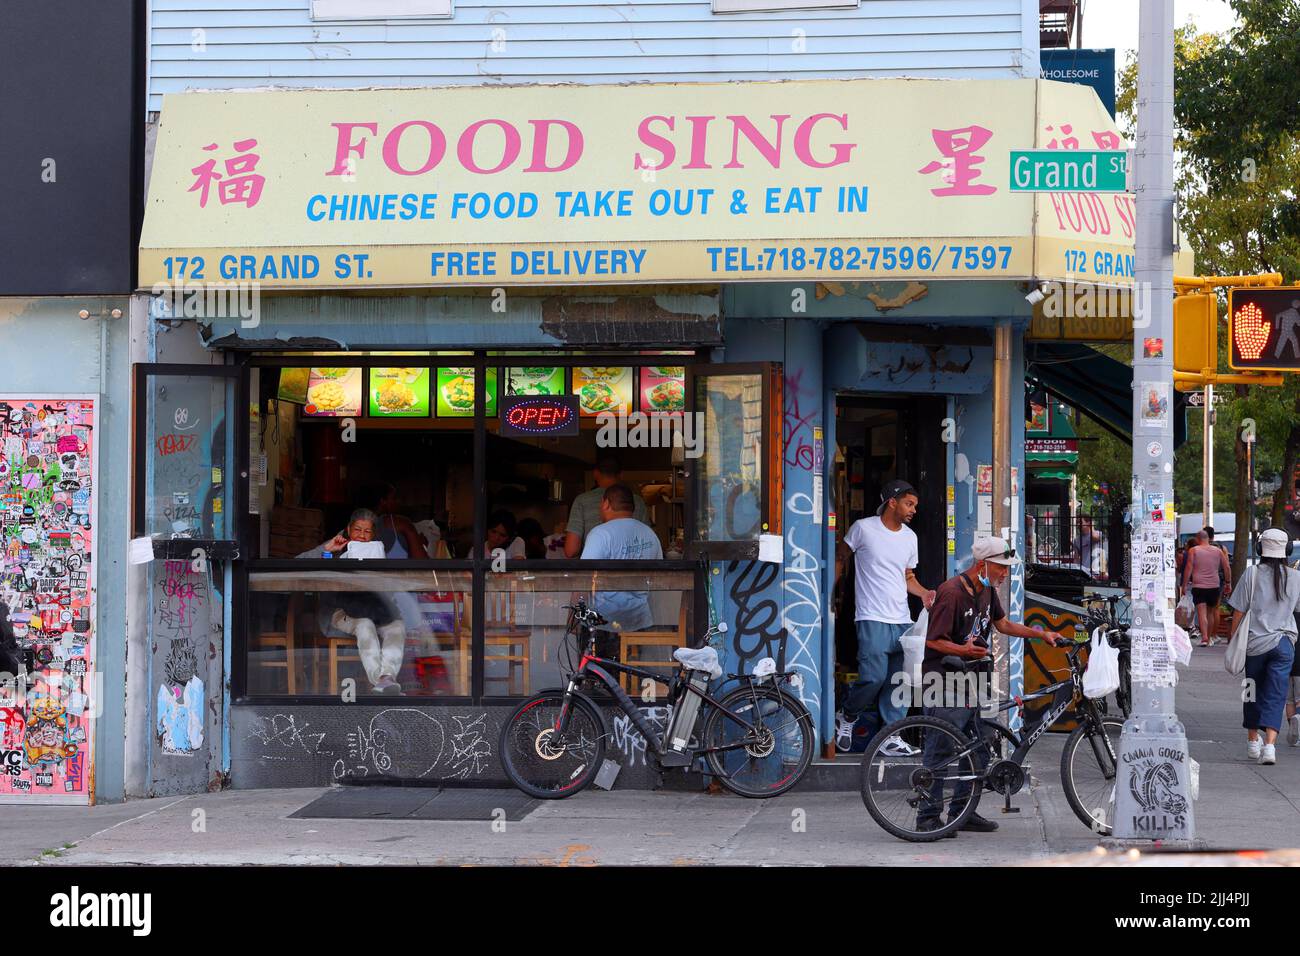 Food Sing, 172 Grand St, Brooklyn, NY. exterior storefront of a Chinese takeout restaurant in the Williamsburg neighborhood. Stock Photo